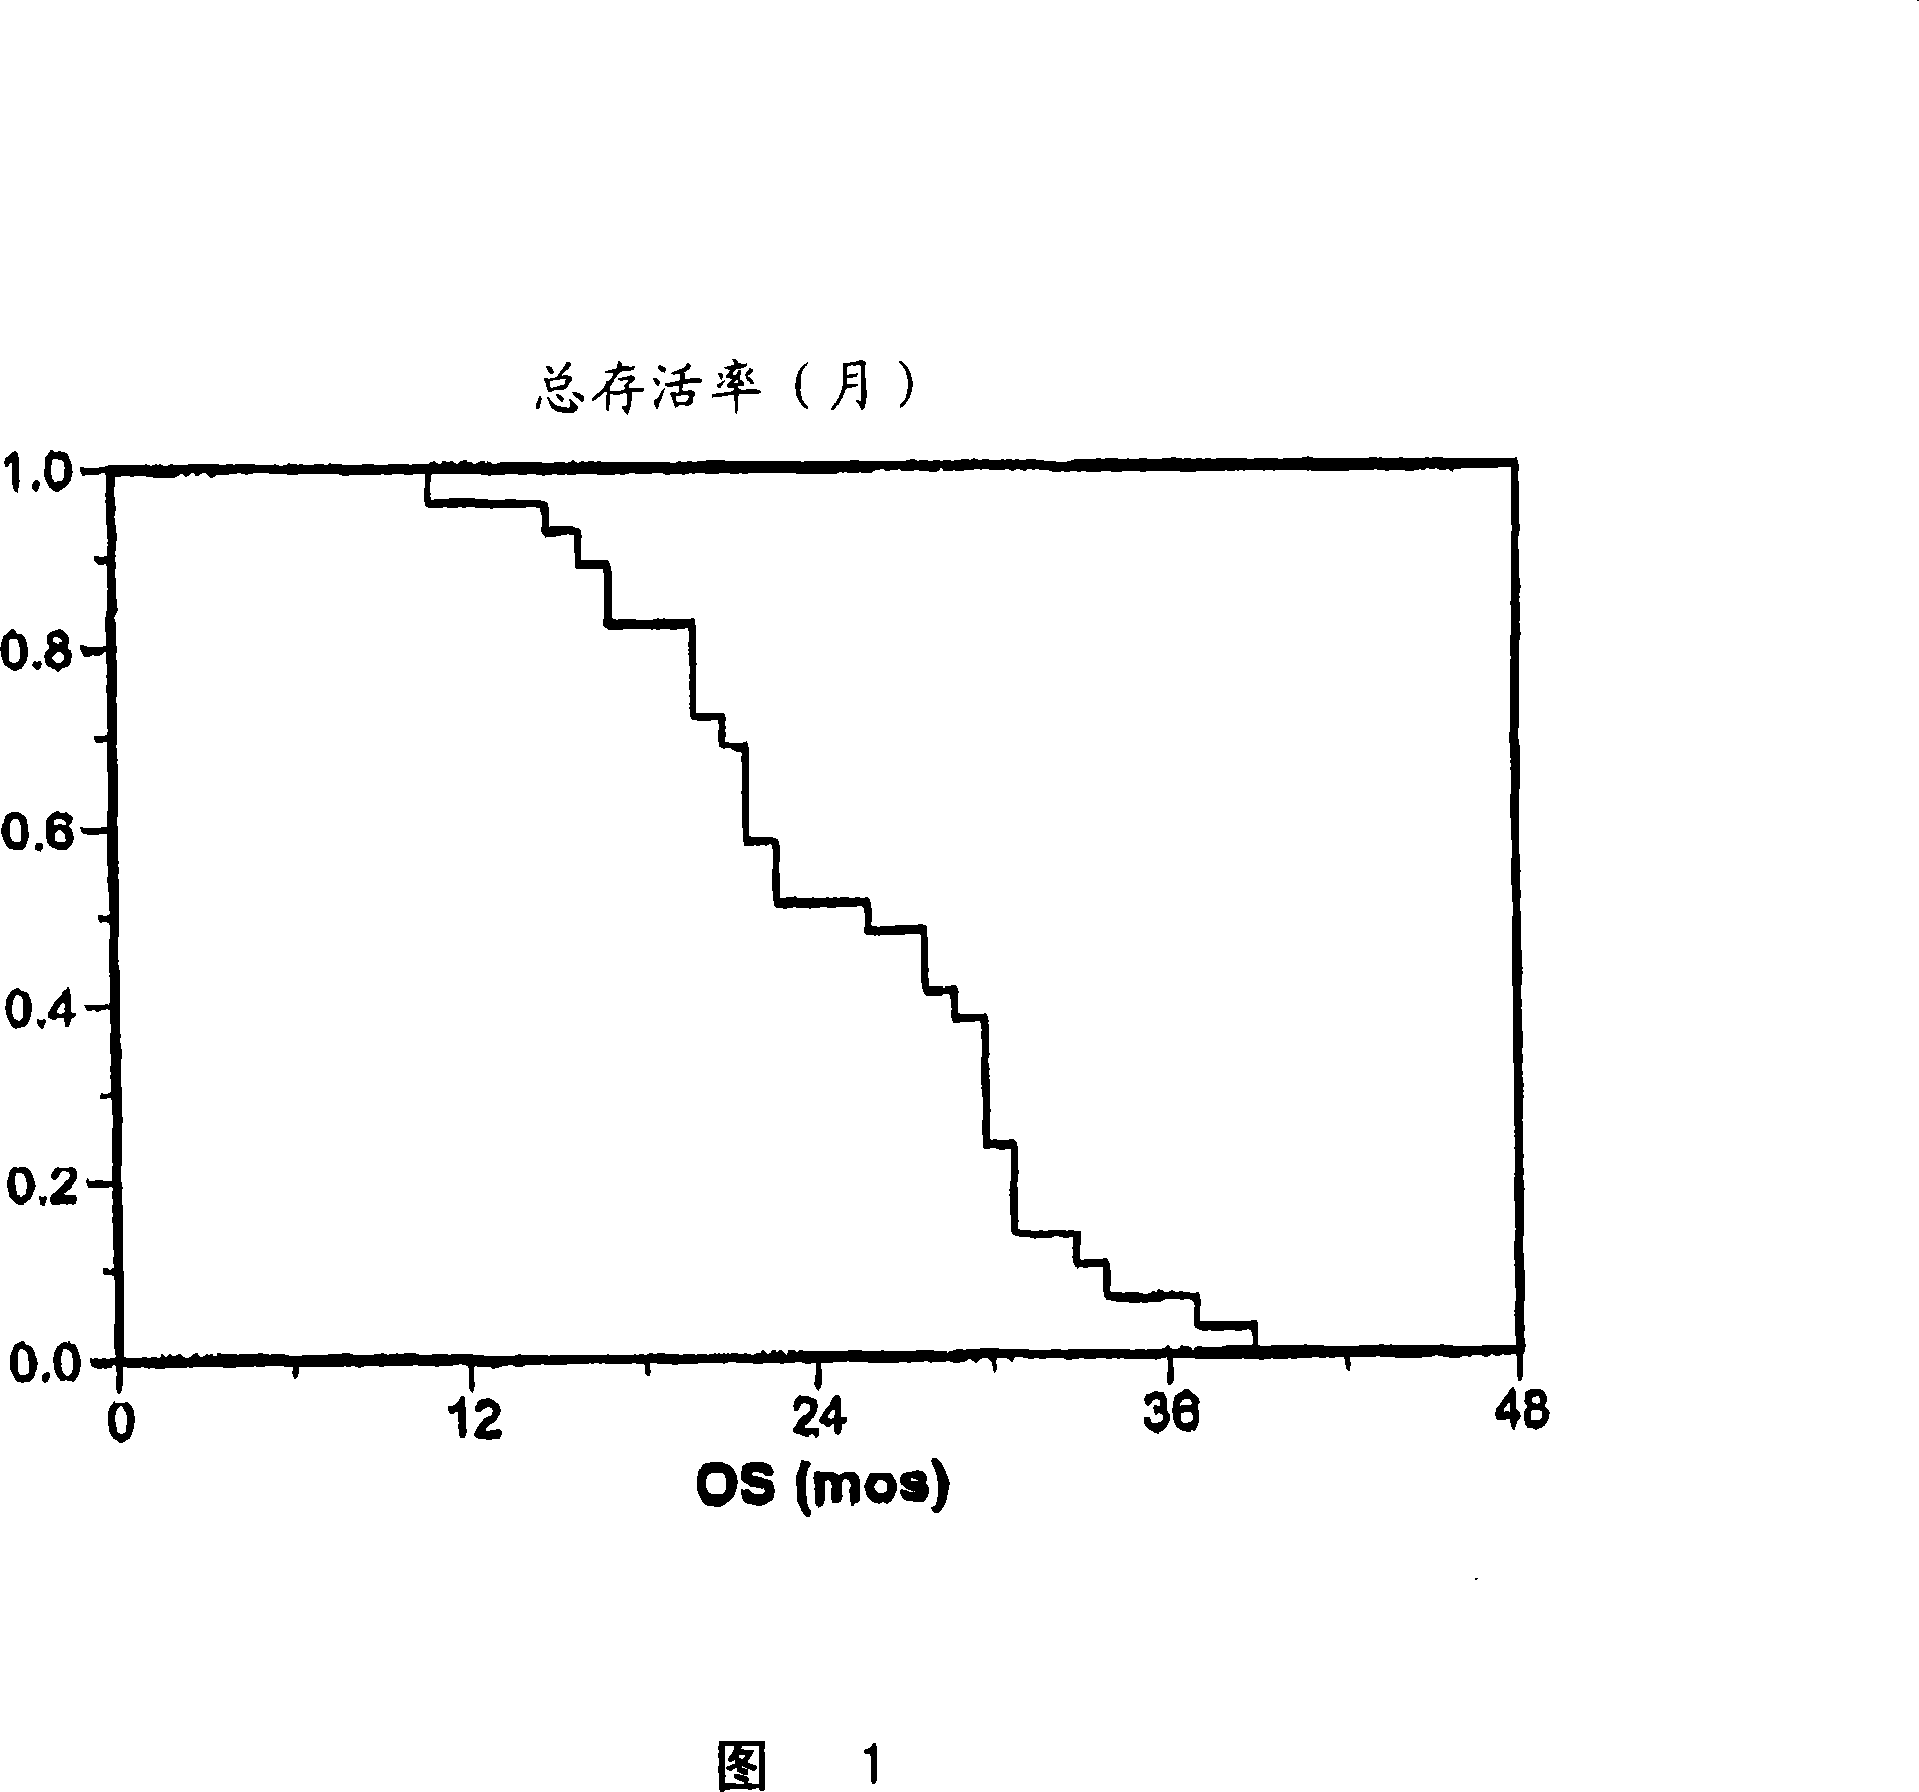 Method for treating advanced ovarian cancer with doxorubicin entrapped in liposomes